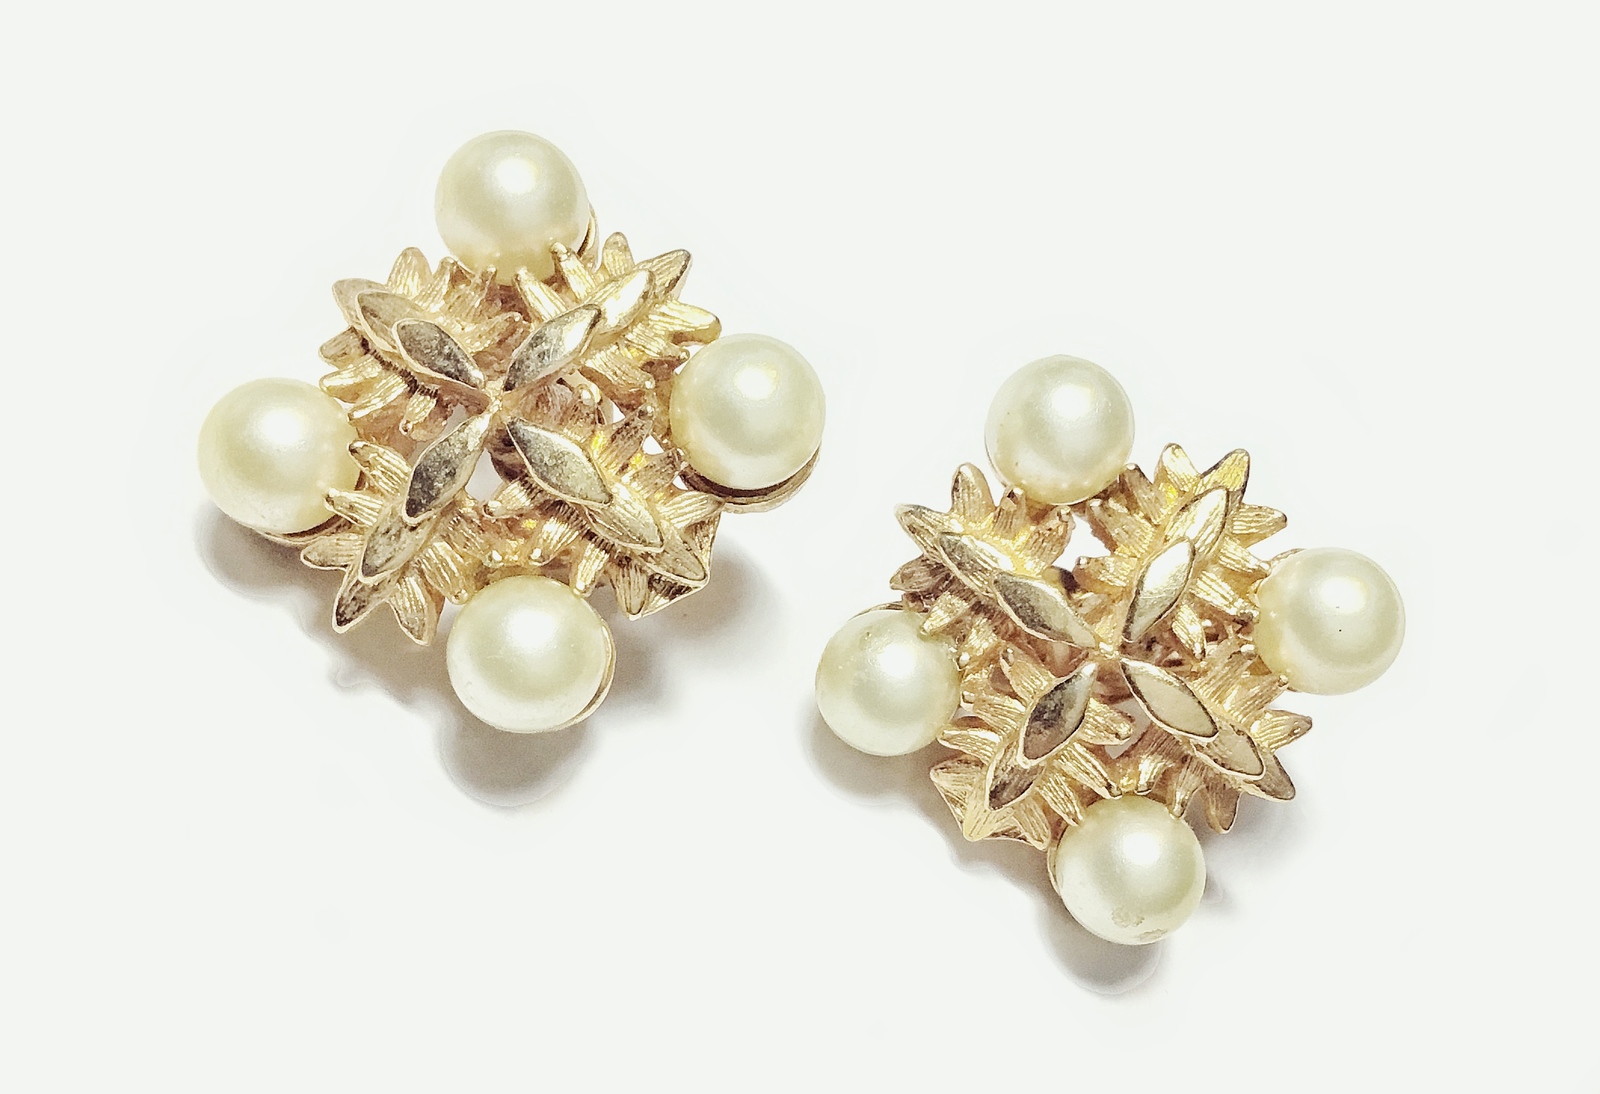 Vintage 1960s Signed Coro Faux Pearls Gold Plated Clip Earrings - $21.95